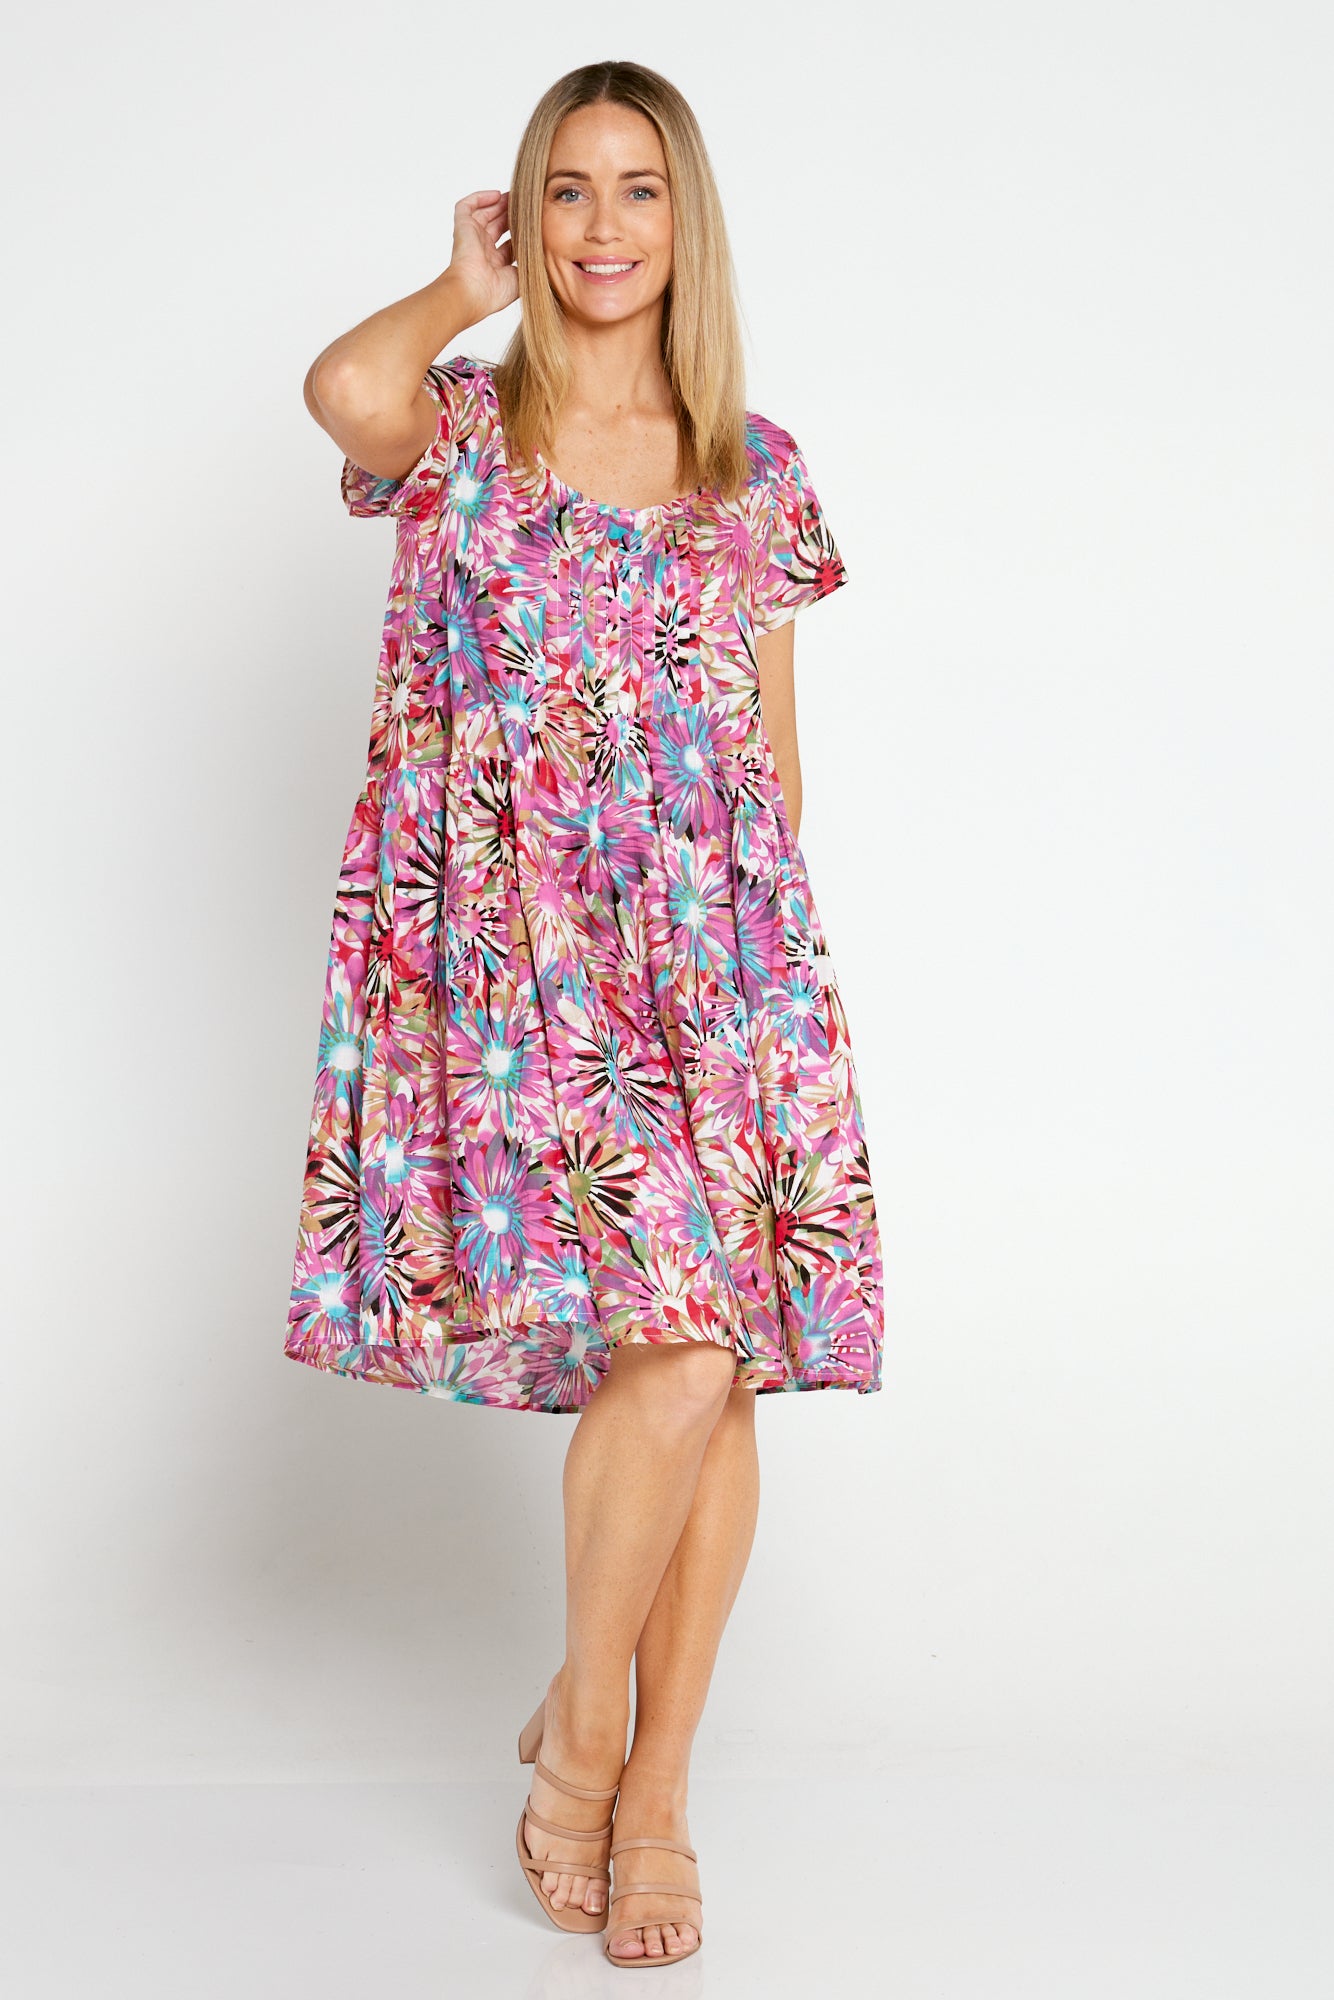 Emery Cotton Dress - Pink Floral